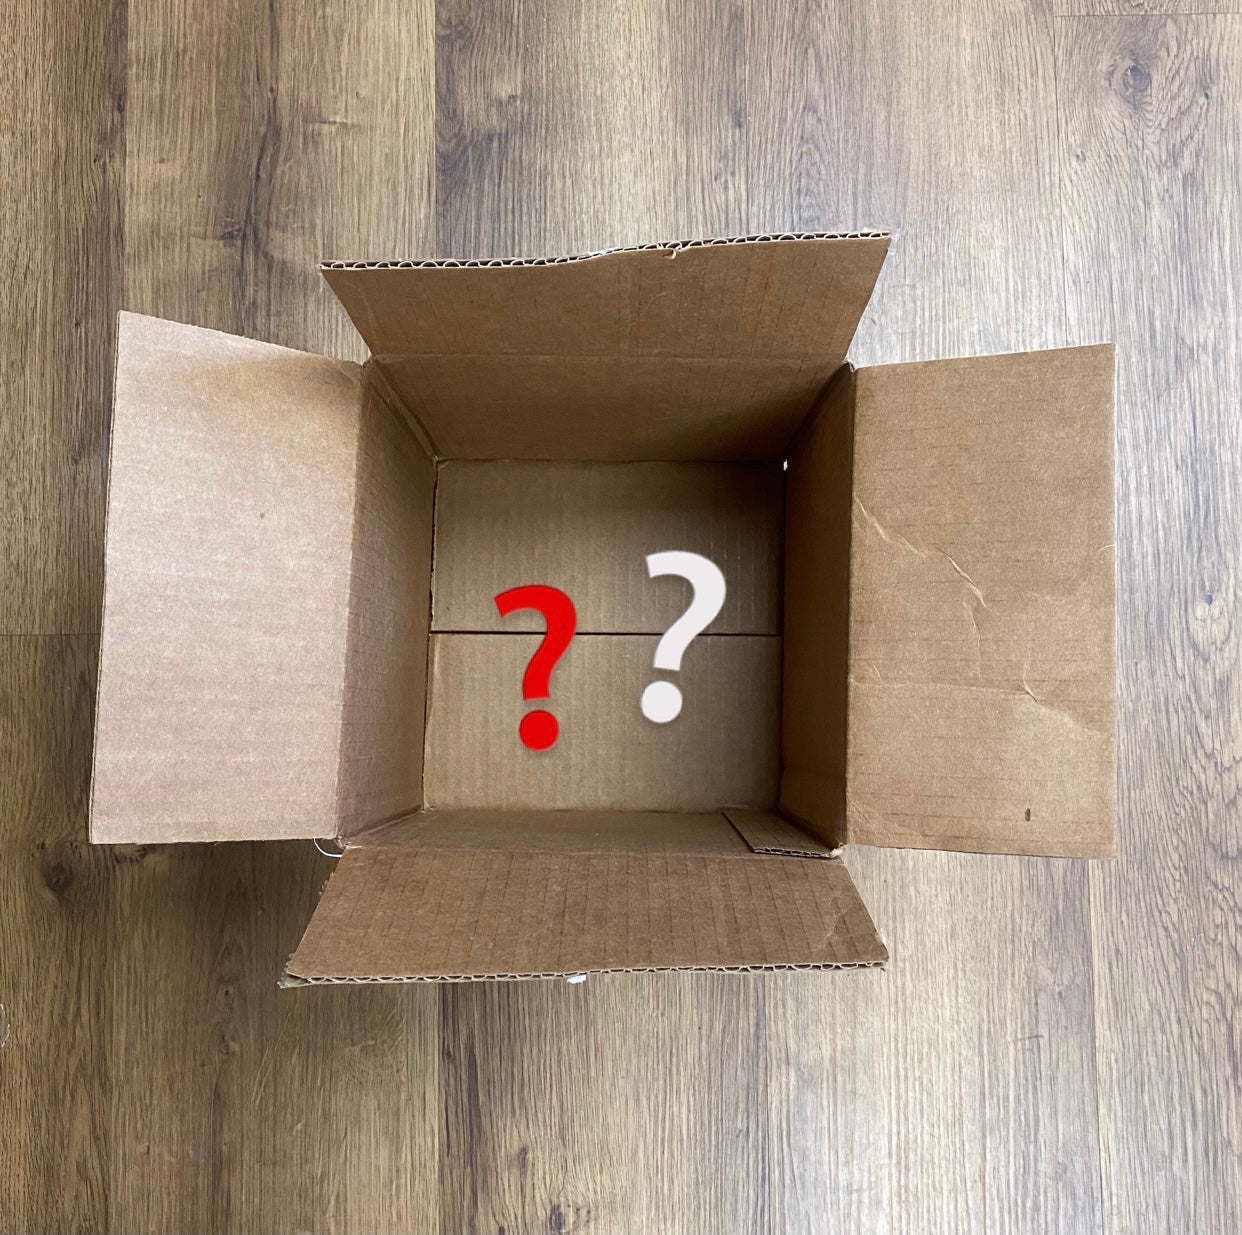 Naturals Collective "Mystery Box" BLACK FRIDAY Edition (3)